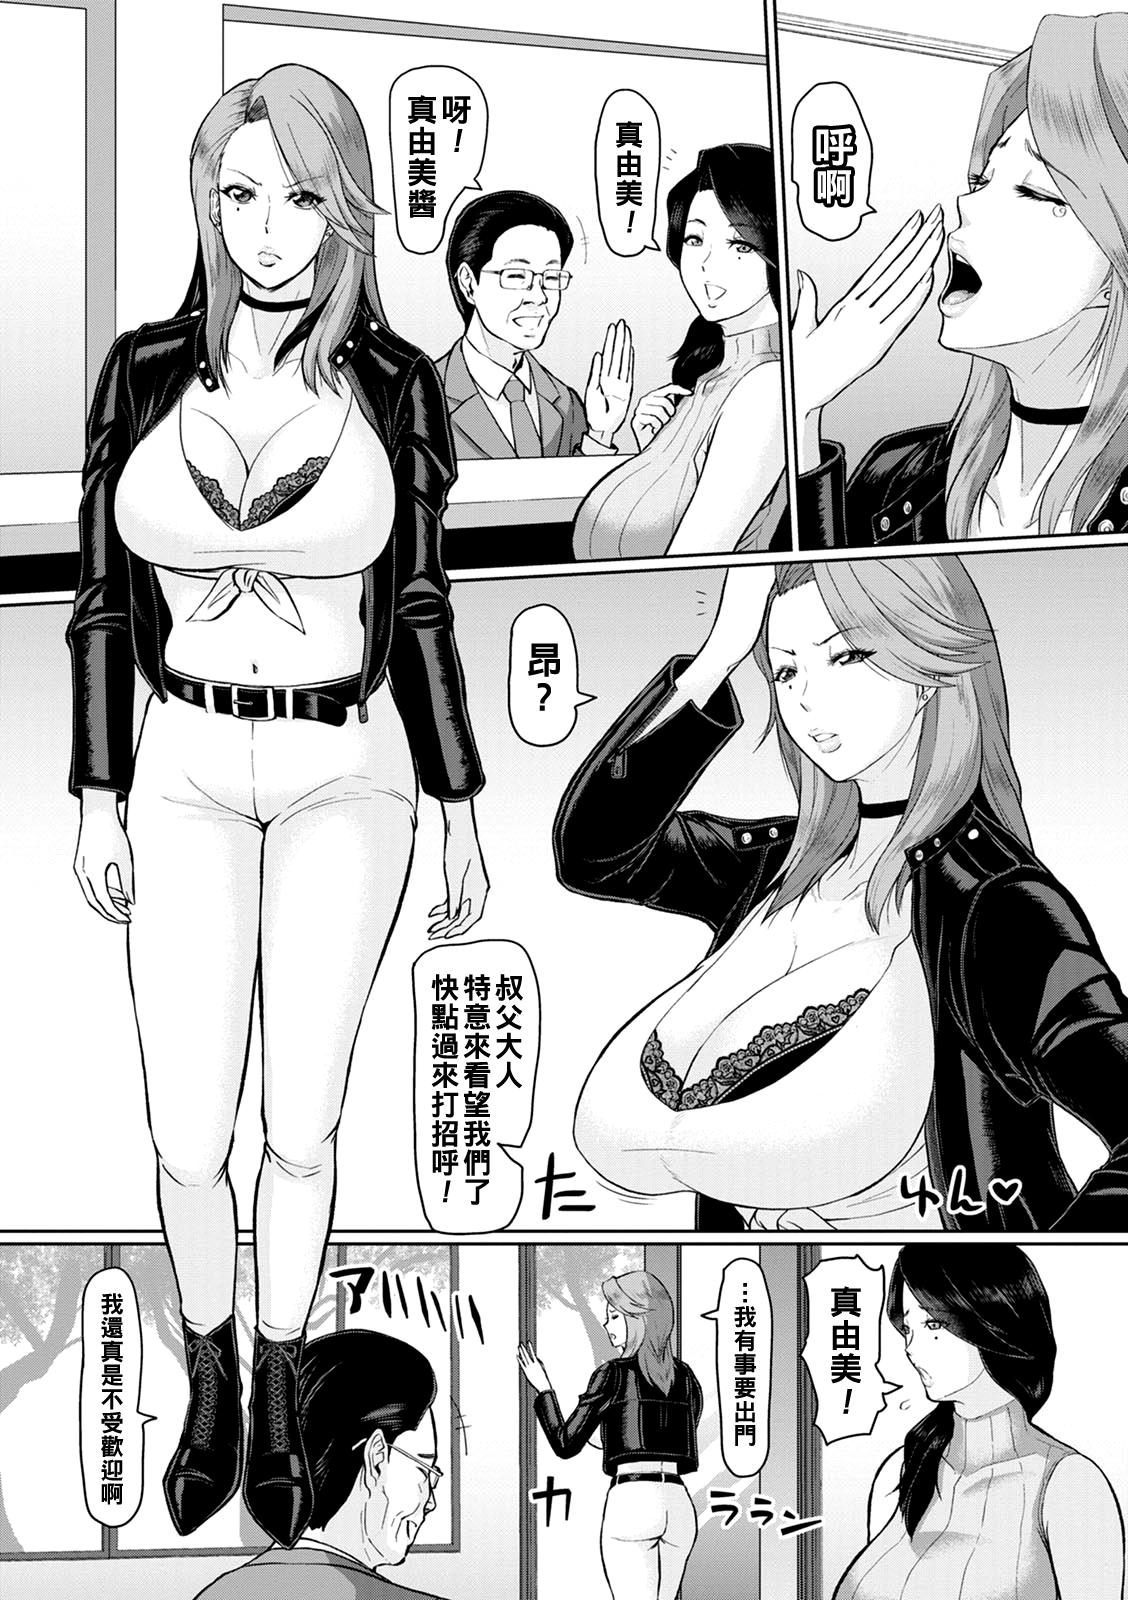 Black Woman 淫姦オークション 前編（Chinese） Colombiana - Page 3